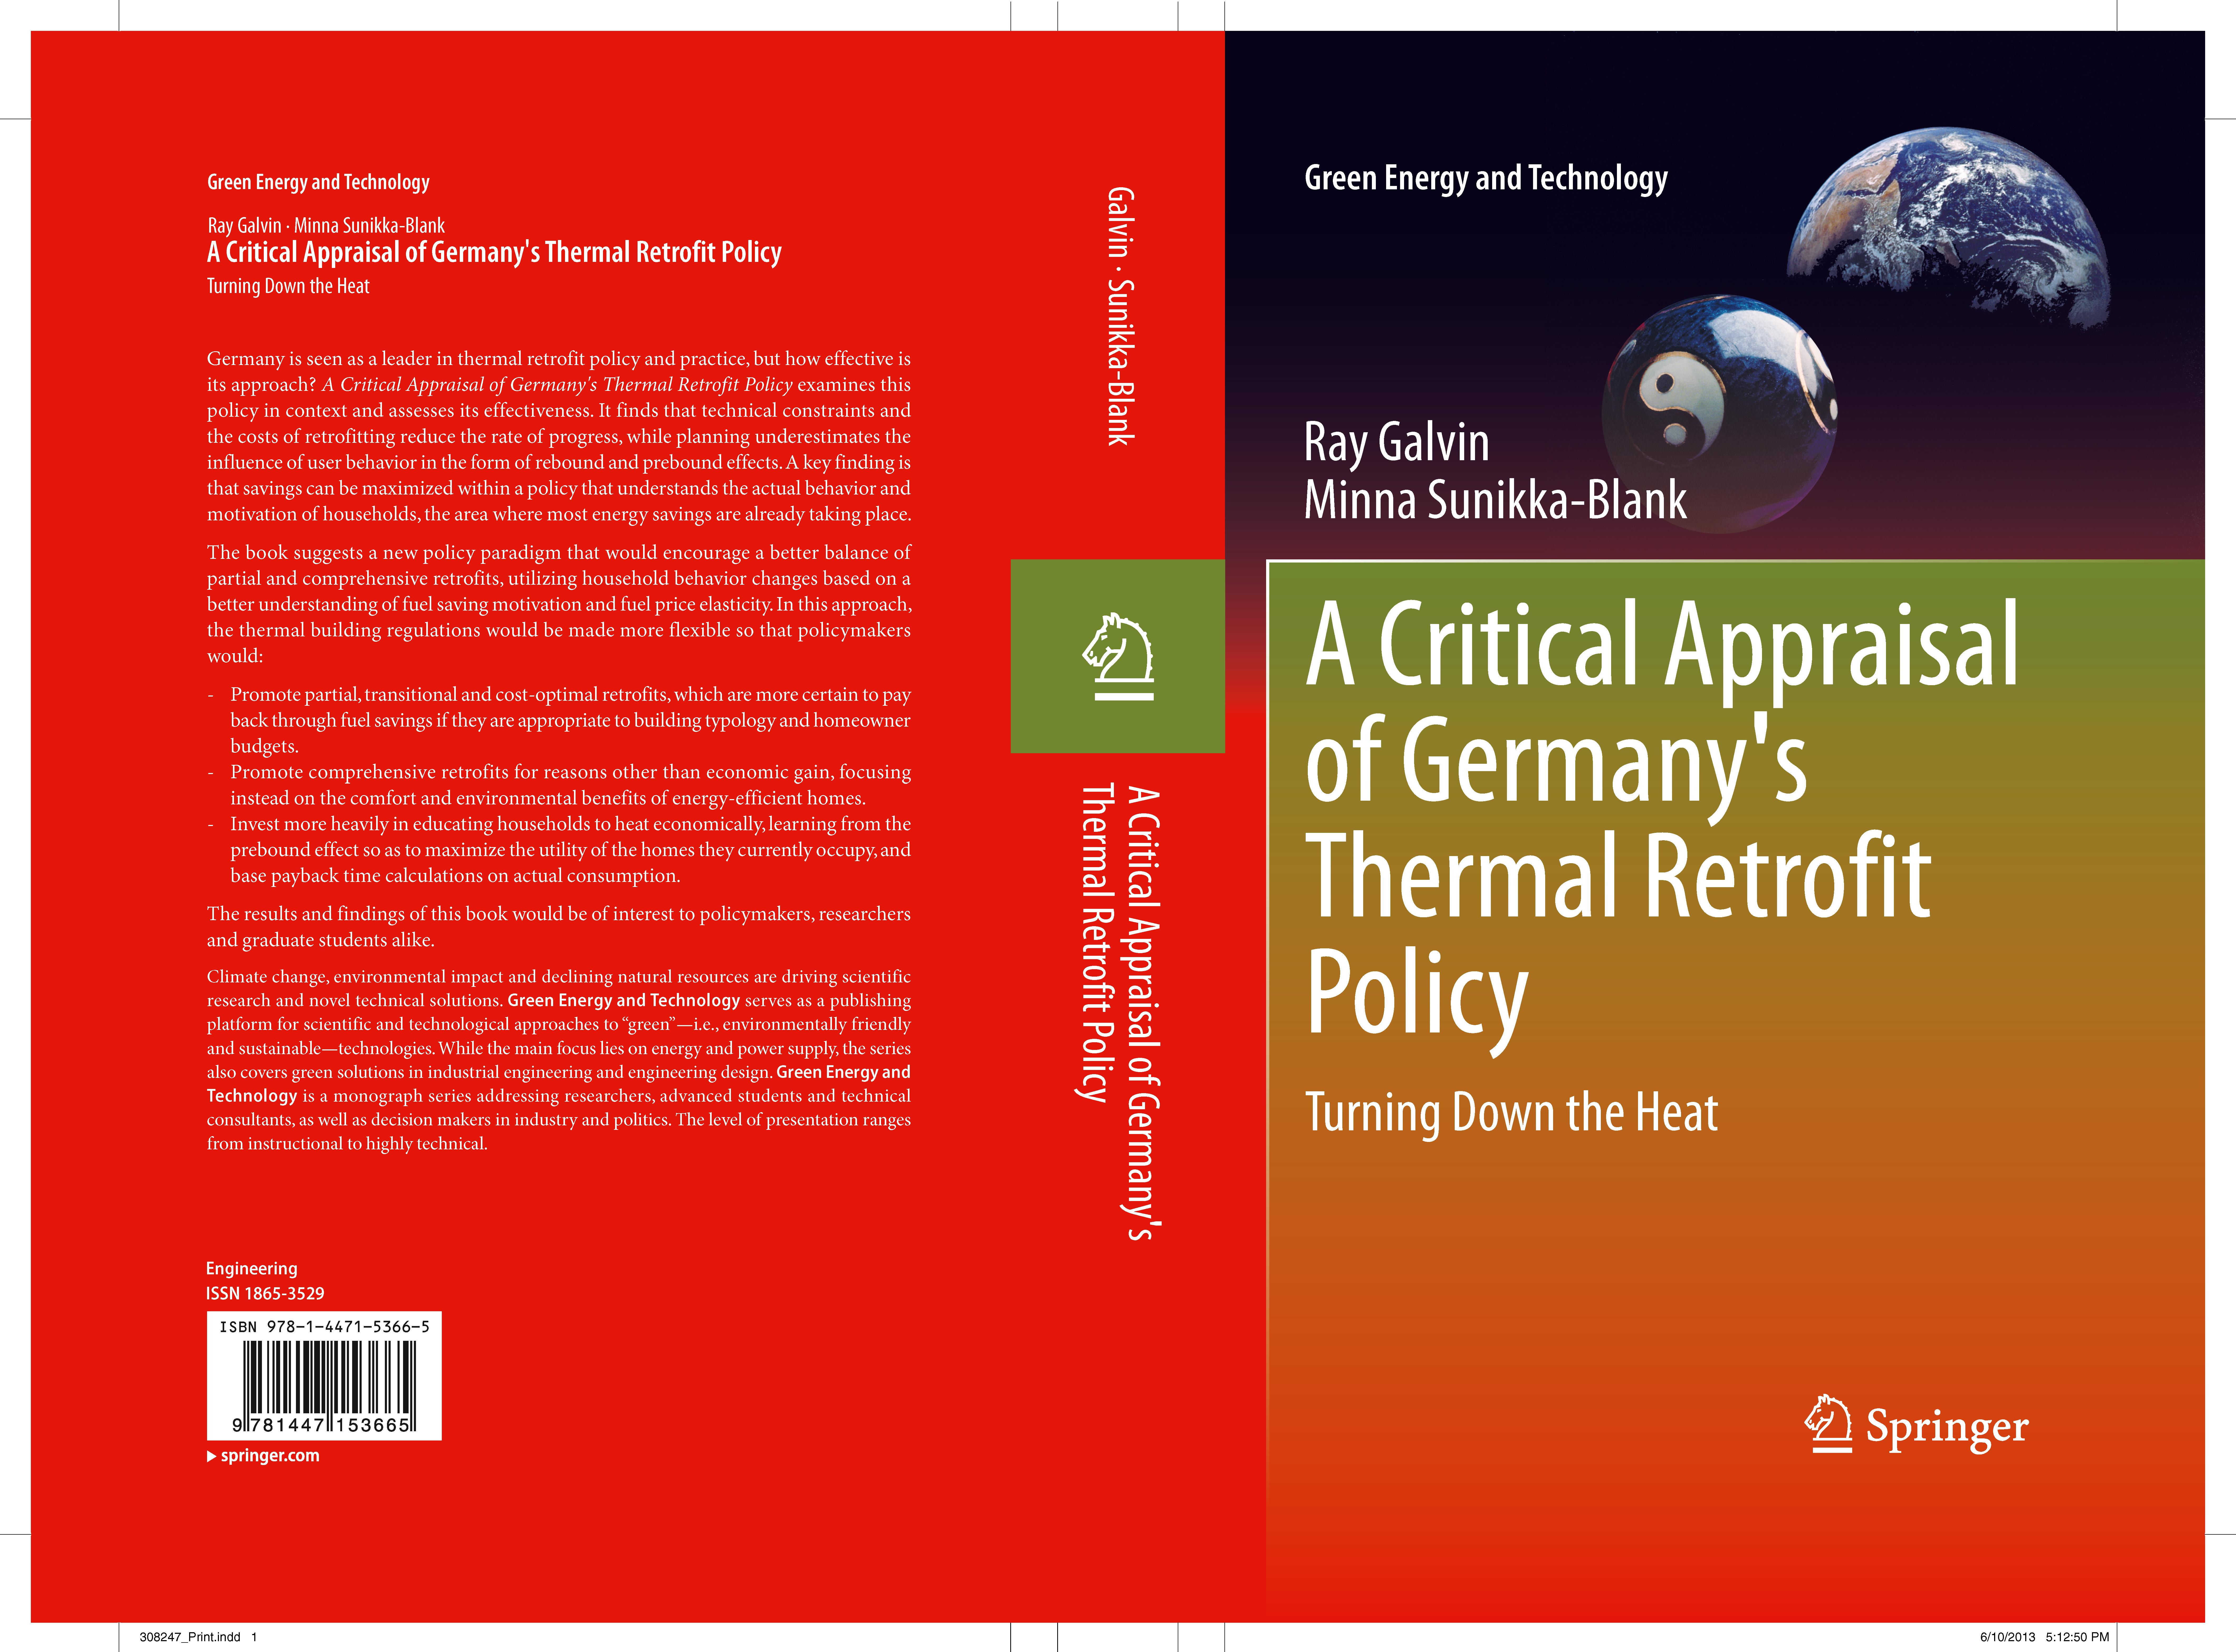 'A Critical Appraisal of Germany's Thermal Retrofit Policy,Turning Down the Heat ': a new book on energy policy by Minna Sunikka-Blank and Ray Galvin